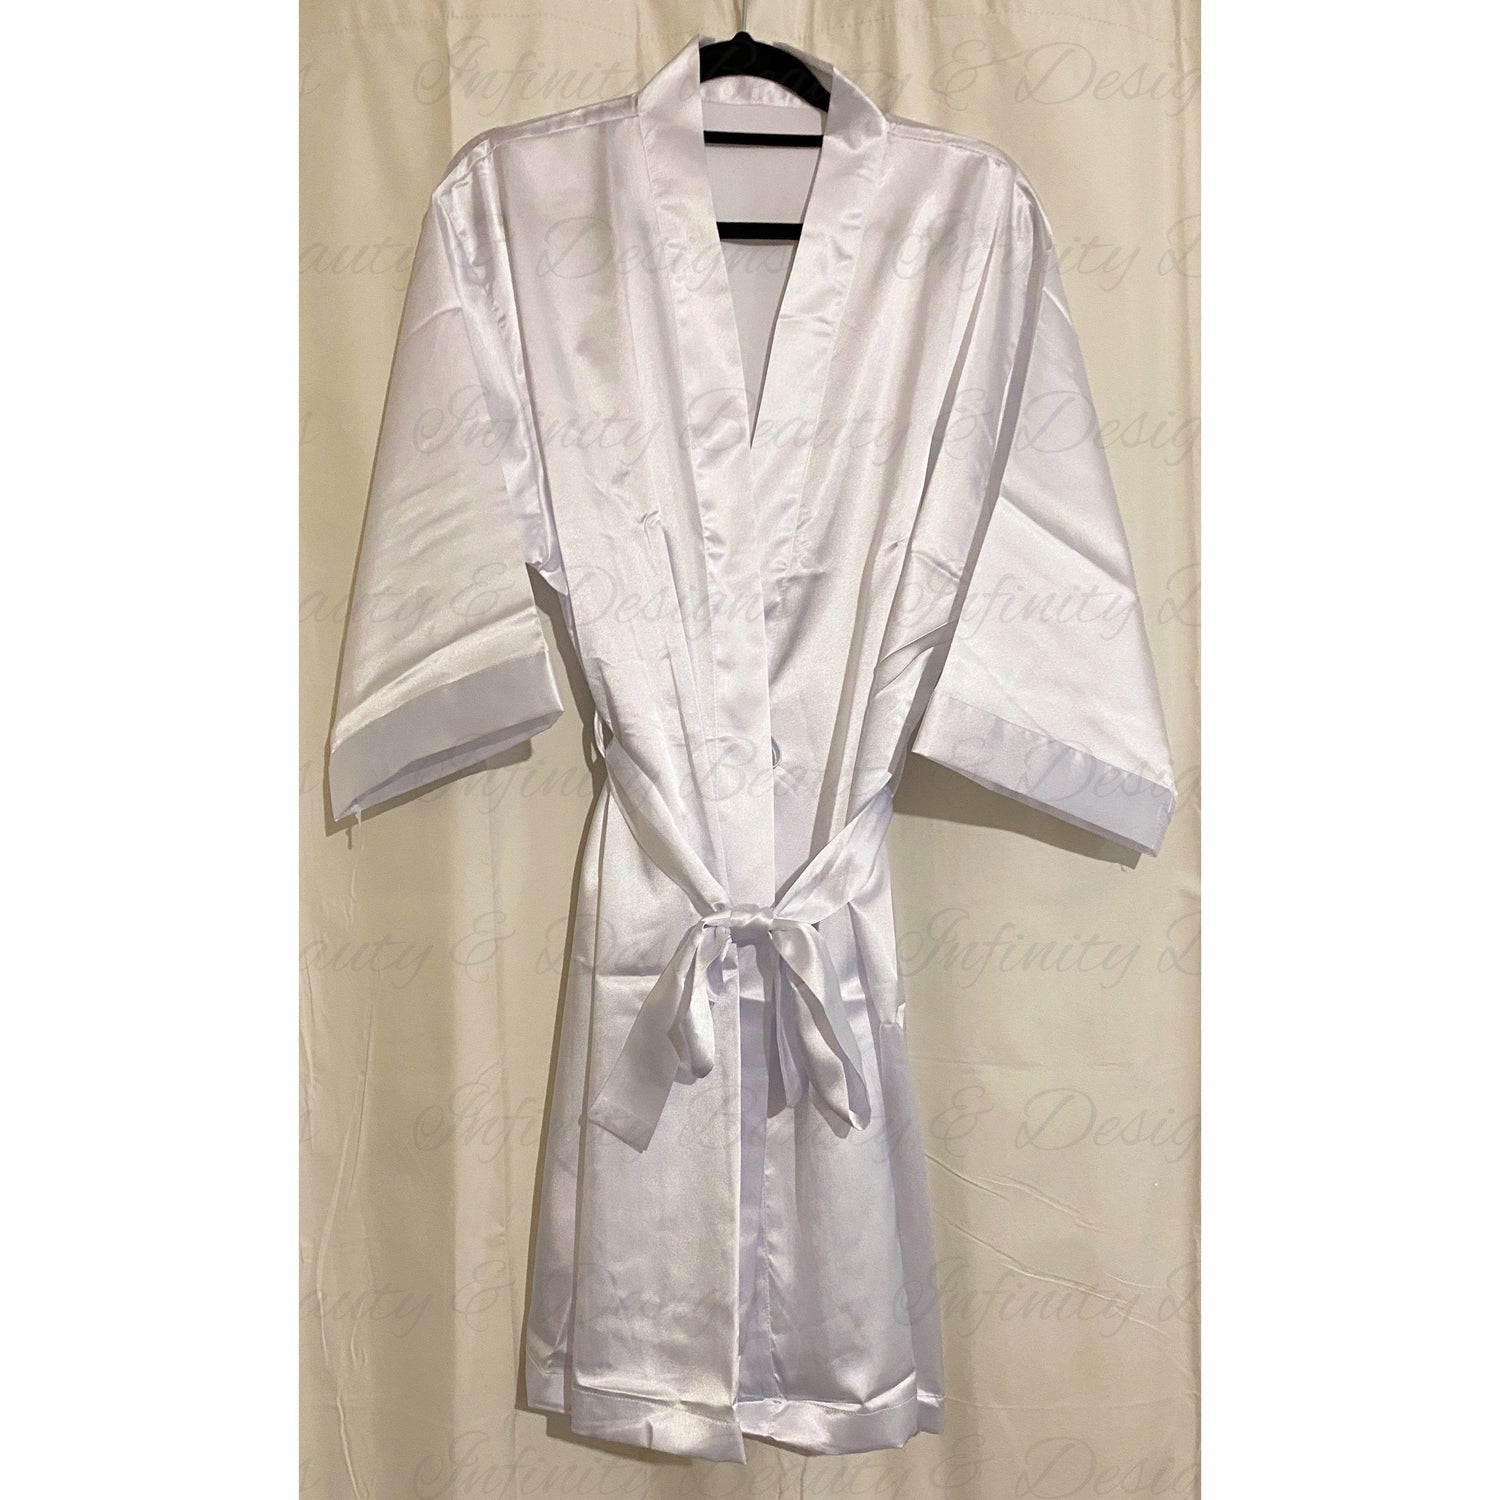 Satin Robes-Infinity Beauty & Designs